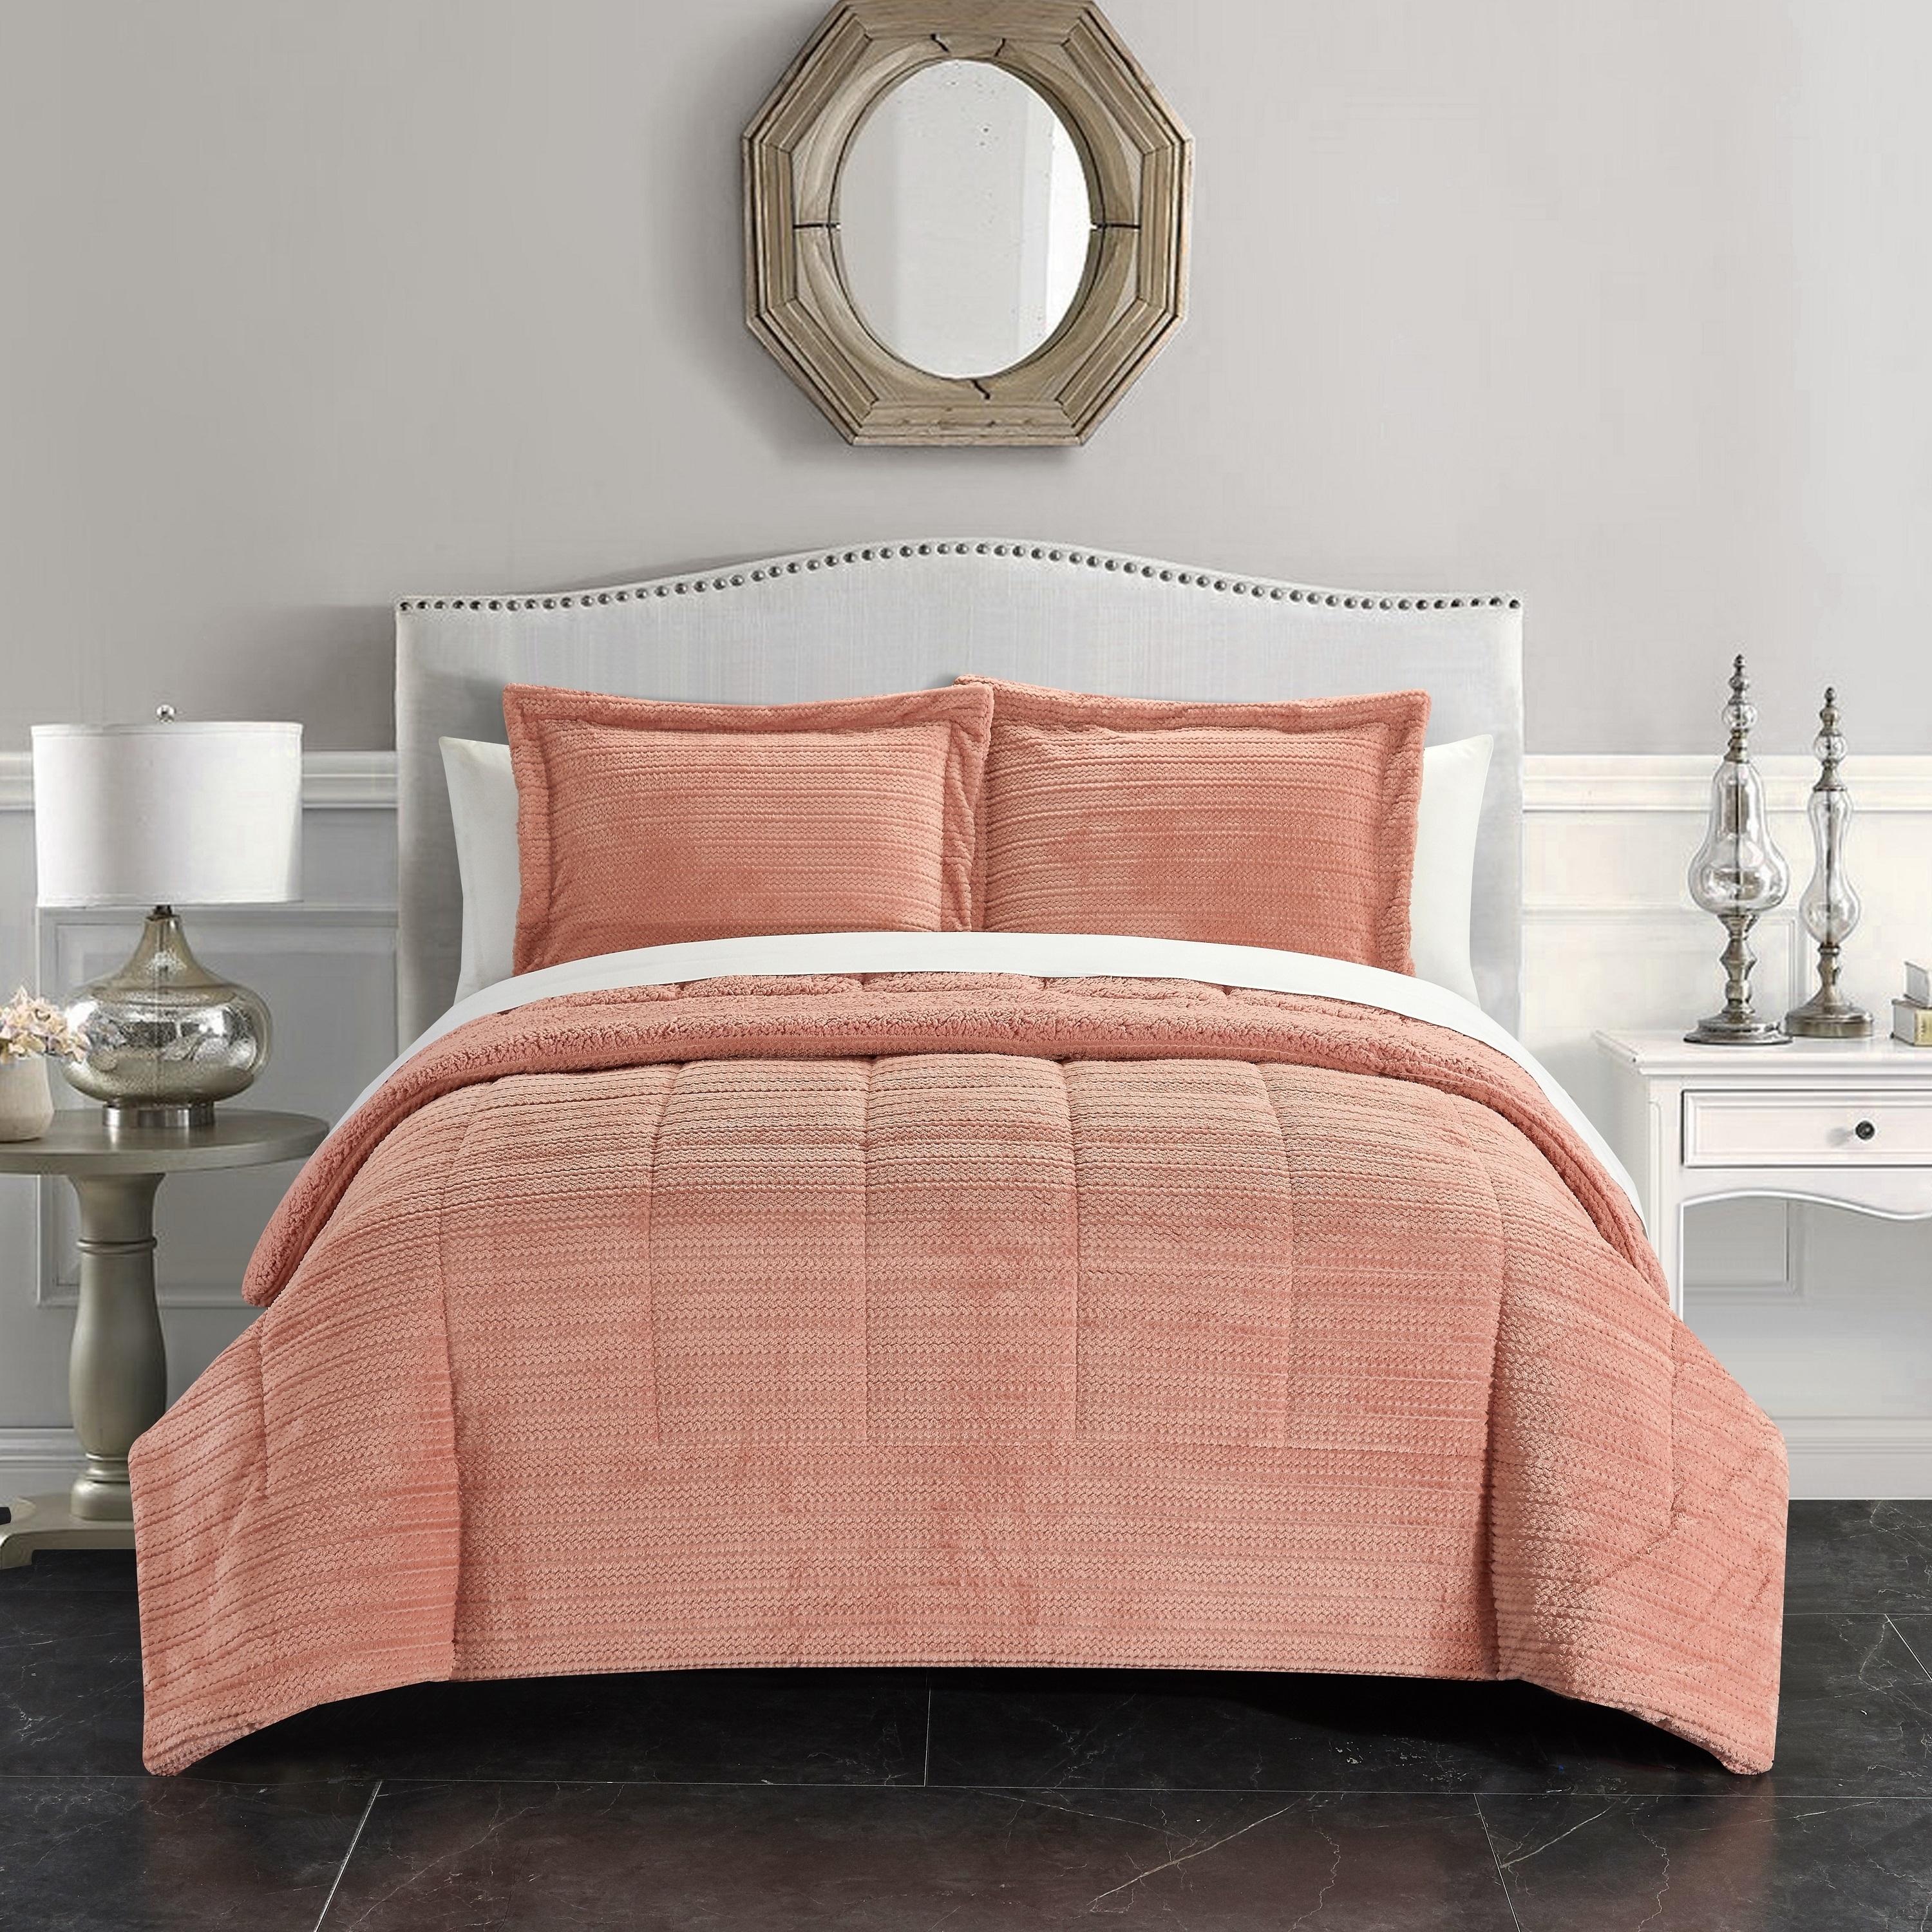 Ryland 3 Or 2 Piece Comforter Set Ribbed Textured Microplush Sherpa Bedding - Pillow Shams Included - Blush, Twin